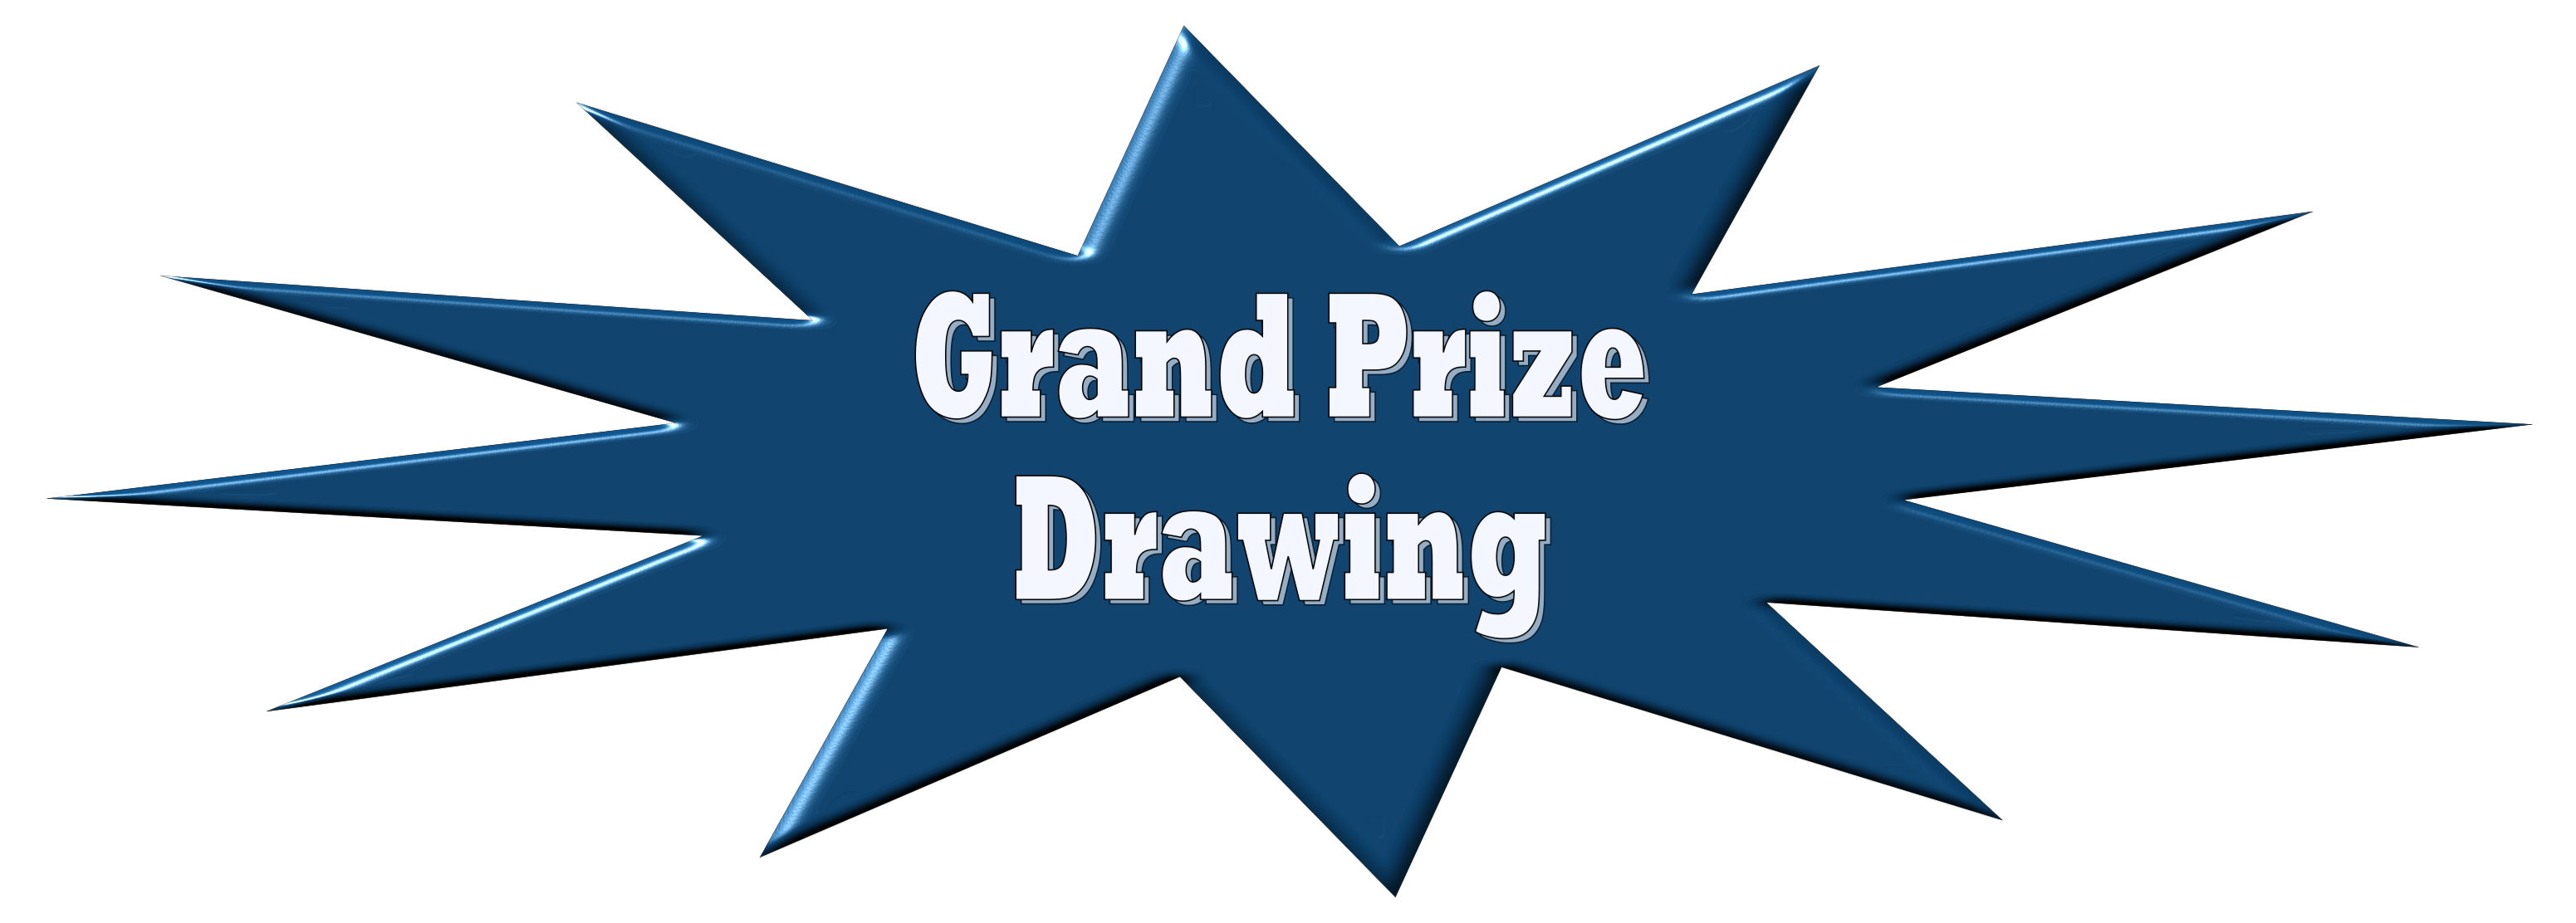 Grand Prize Drawing at Explore collection of Grand